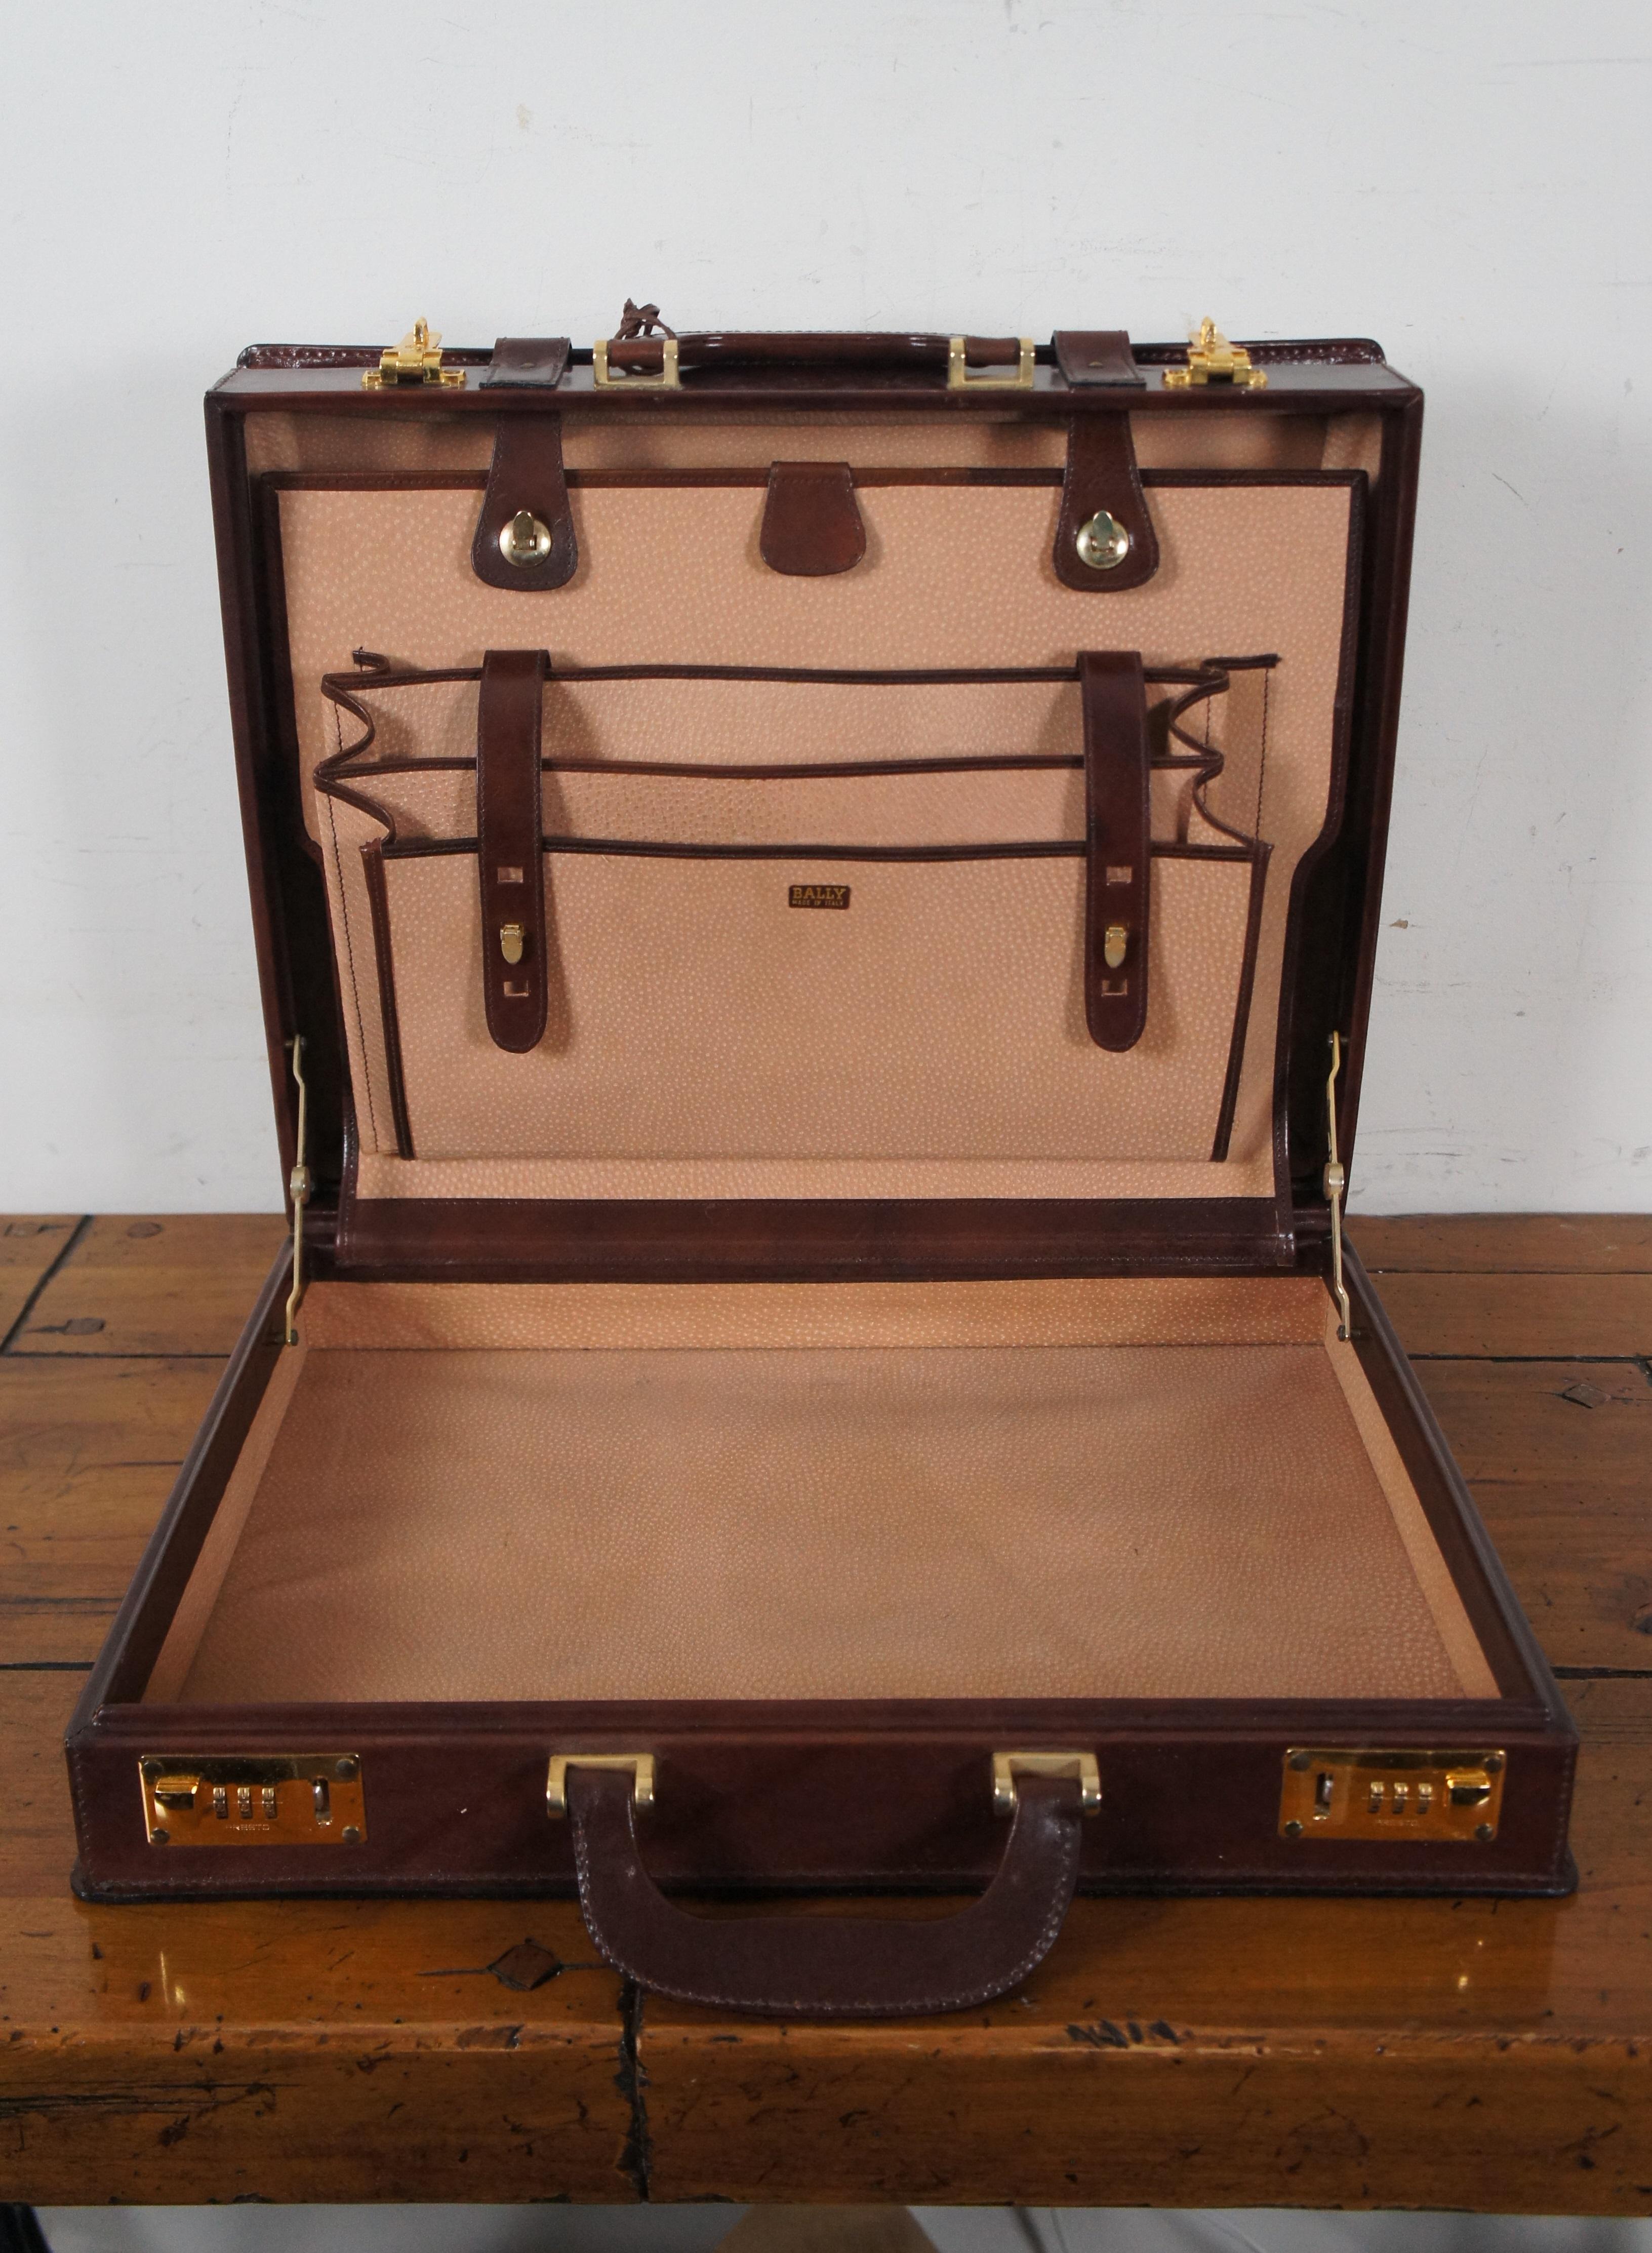 Italian Bally Presto Lock Dark Brown Leather Expandable Executive Briefcase  In Good Condition For Sale In Dayton, OH